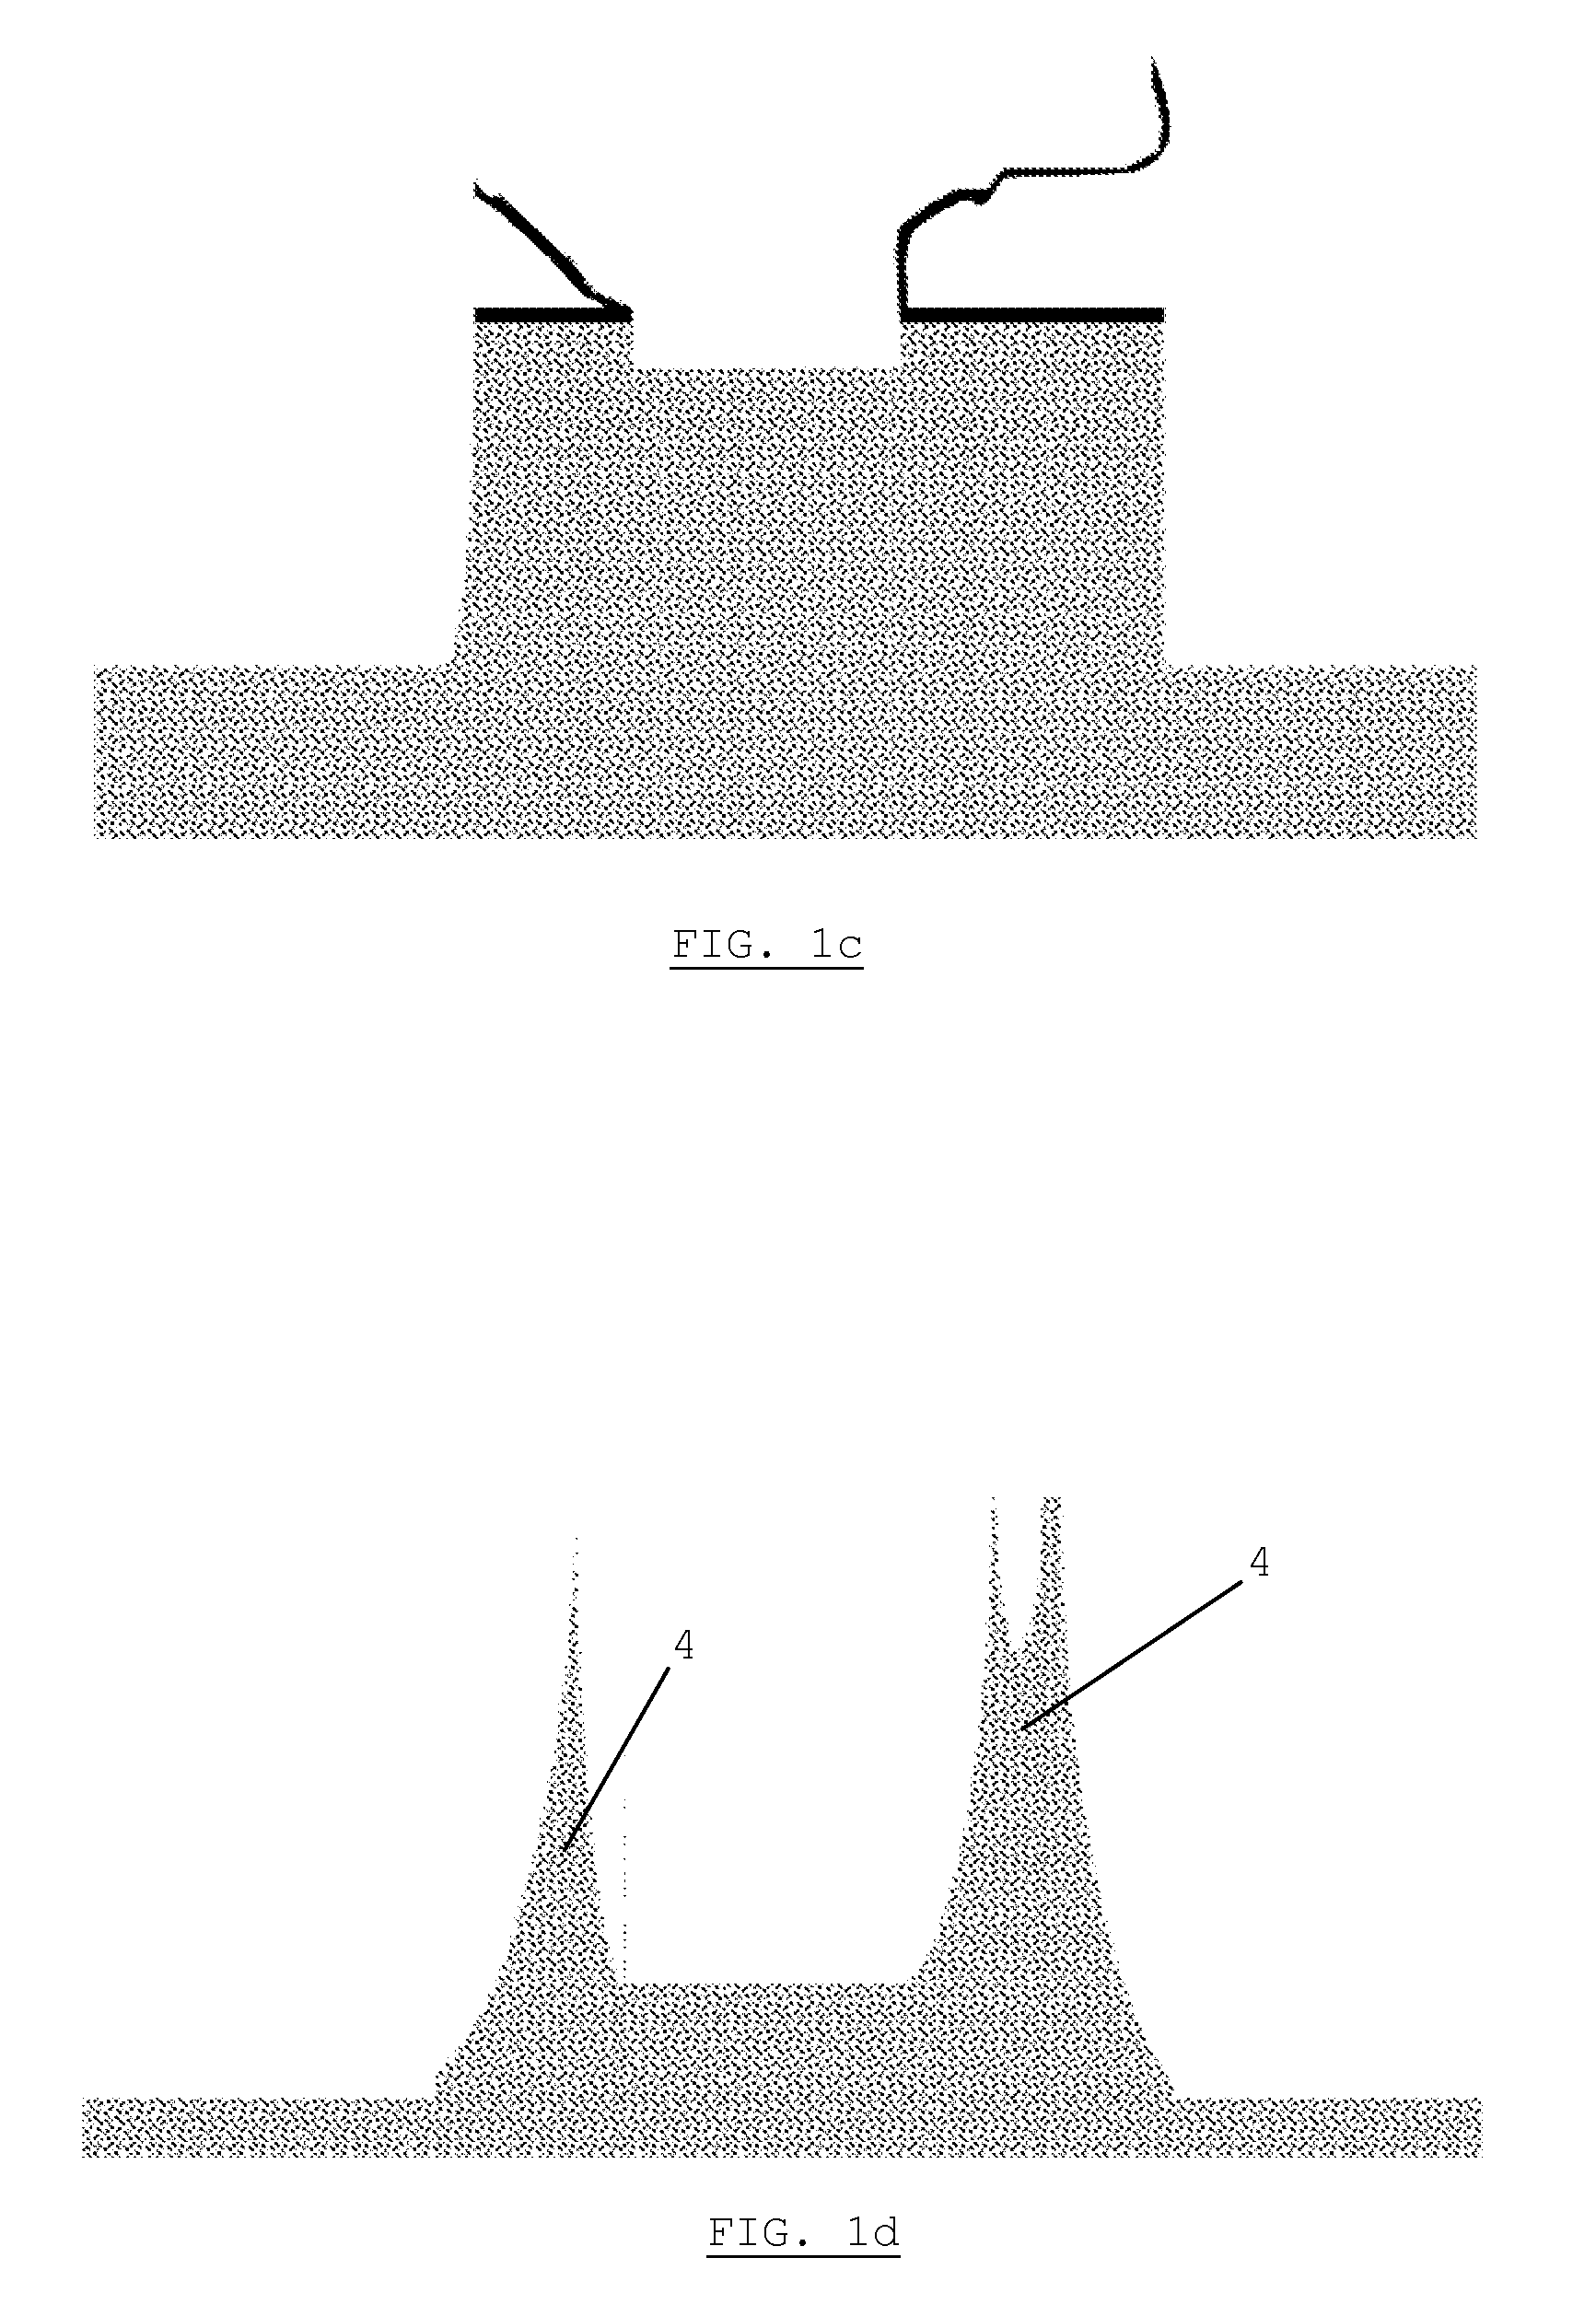 Method for etching 3D structures in a semiconductor substrate, including surface preparation